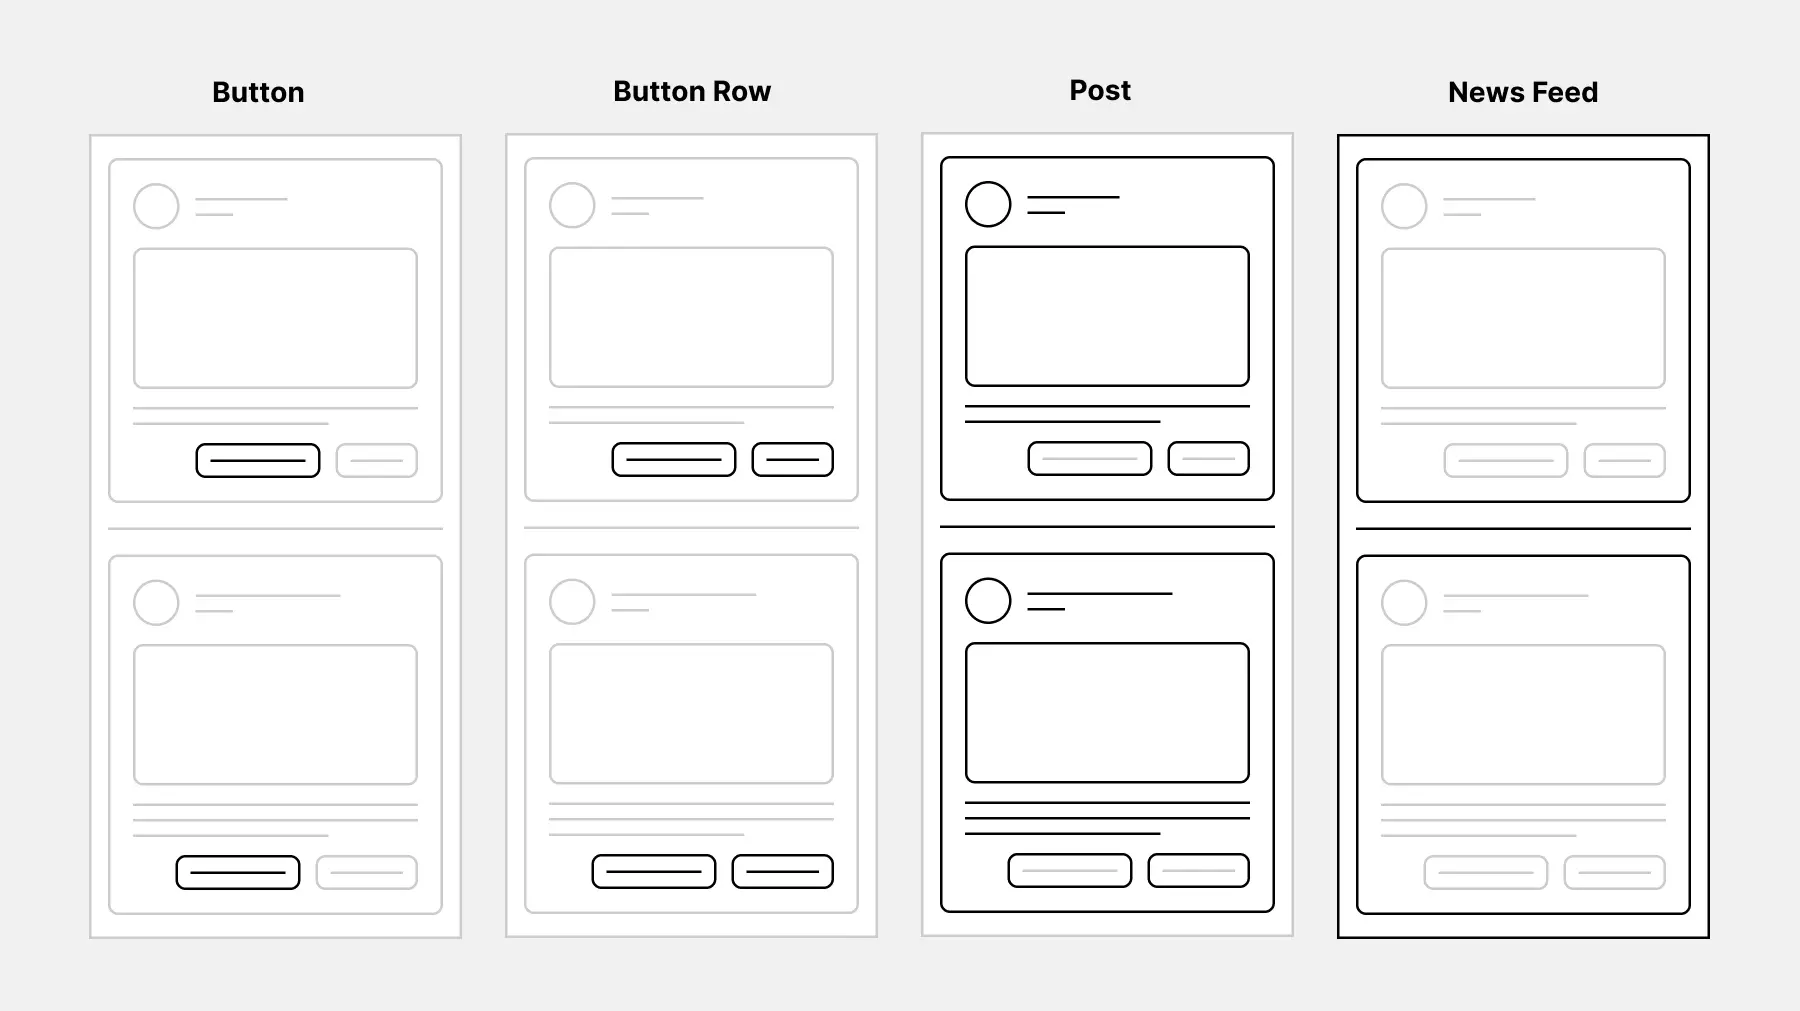 An image of Figma's examples of auto layouts. Buttons are a child, Button row is an auto layout, post is an auto layout, as is the news feed.